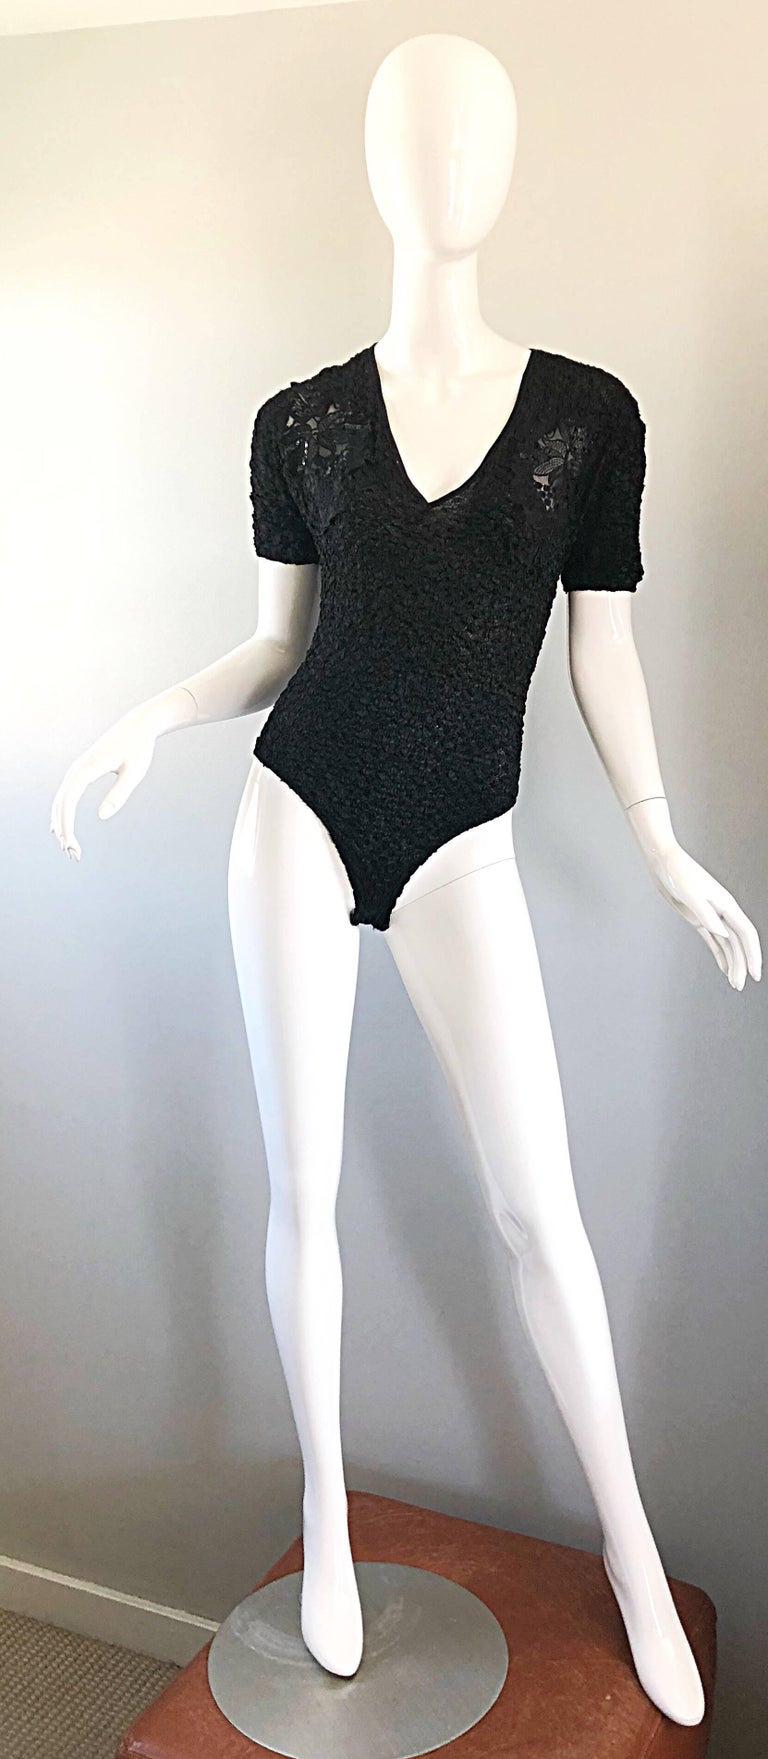 Sexy 1990s black French sequined and beaded short sleeve peek-a-boo one piece bodysuit! Features a soft fabric that stretches to fit. Peek-a-boo details at shoulders are encrusted with black sequins and beads with appliqués. Great with jeans,